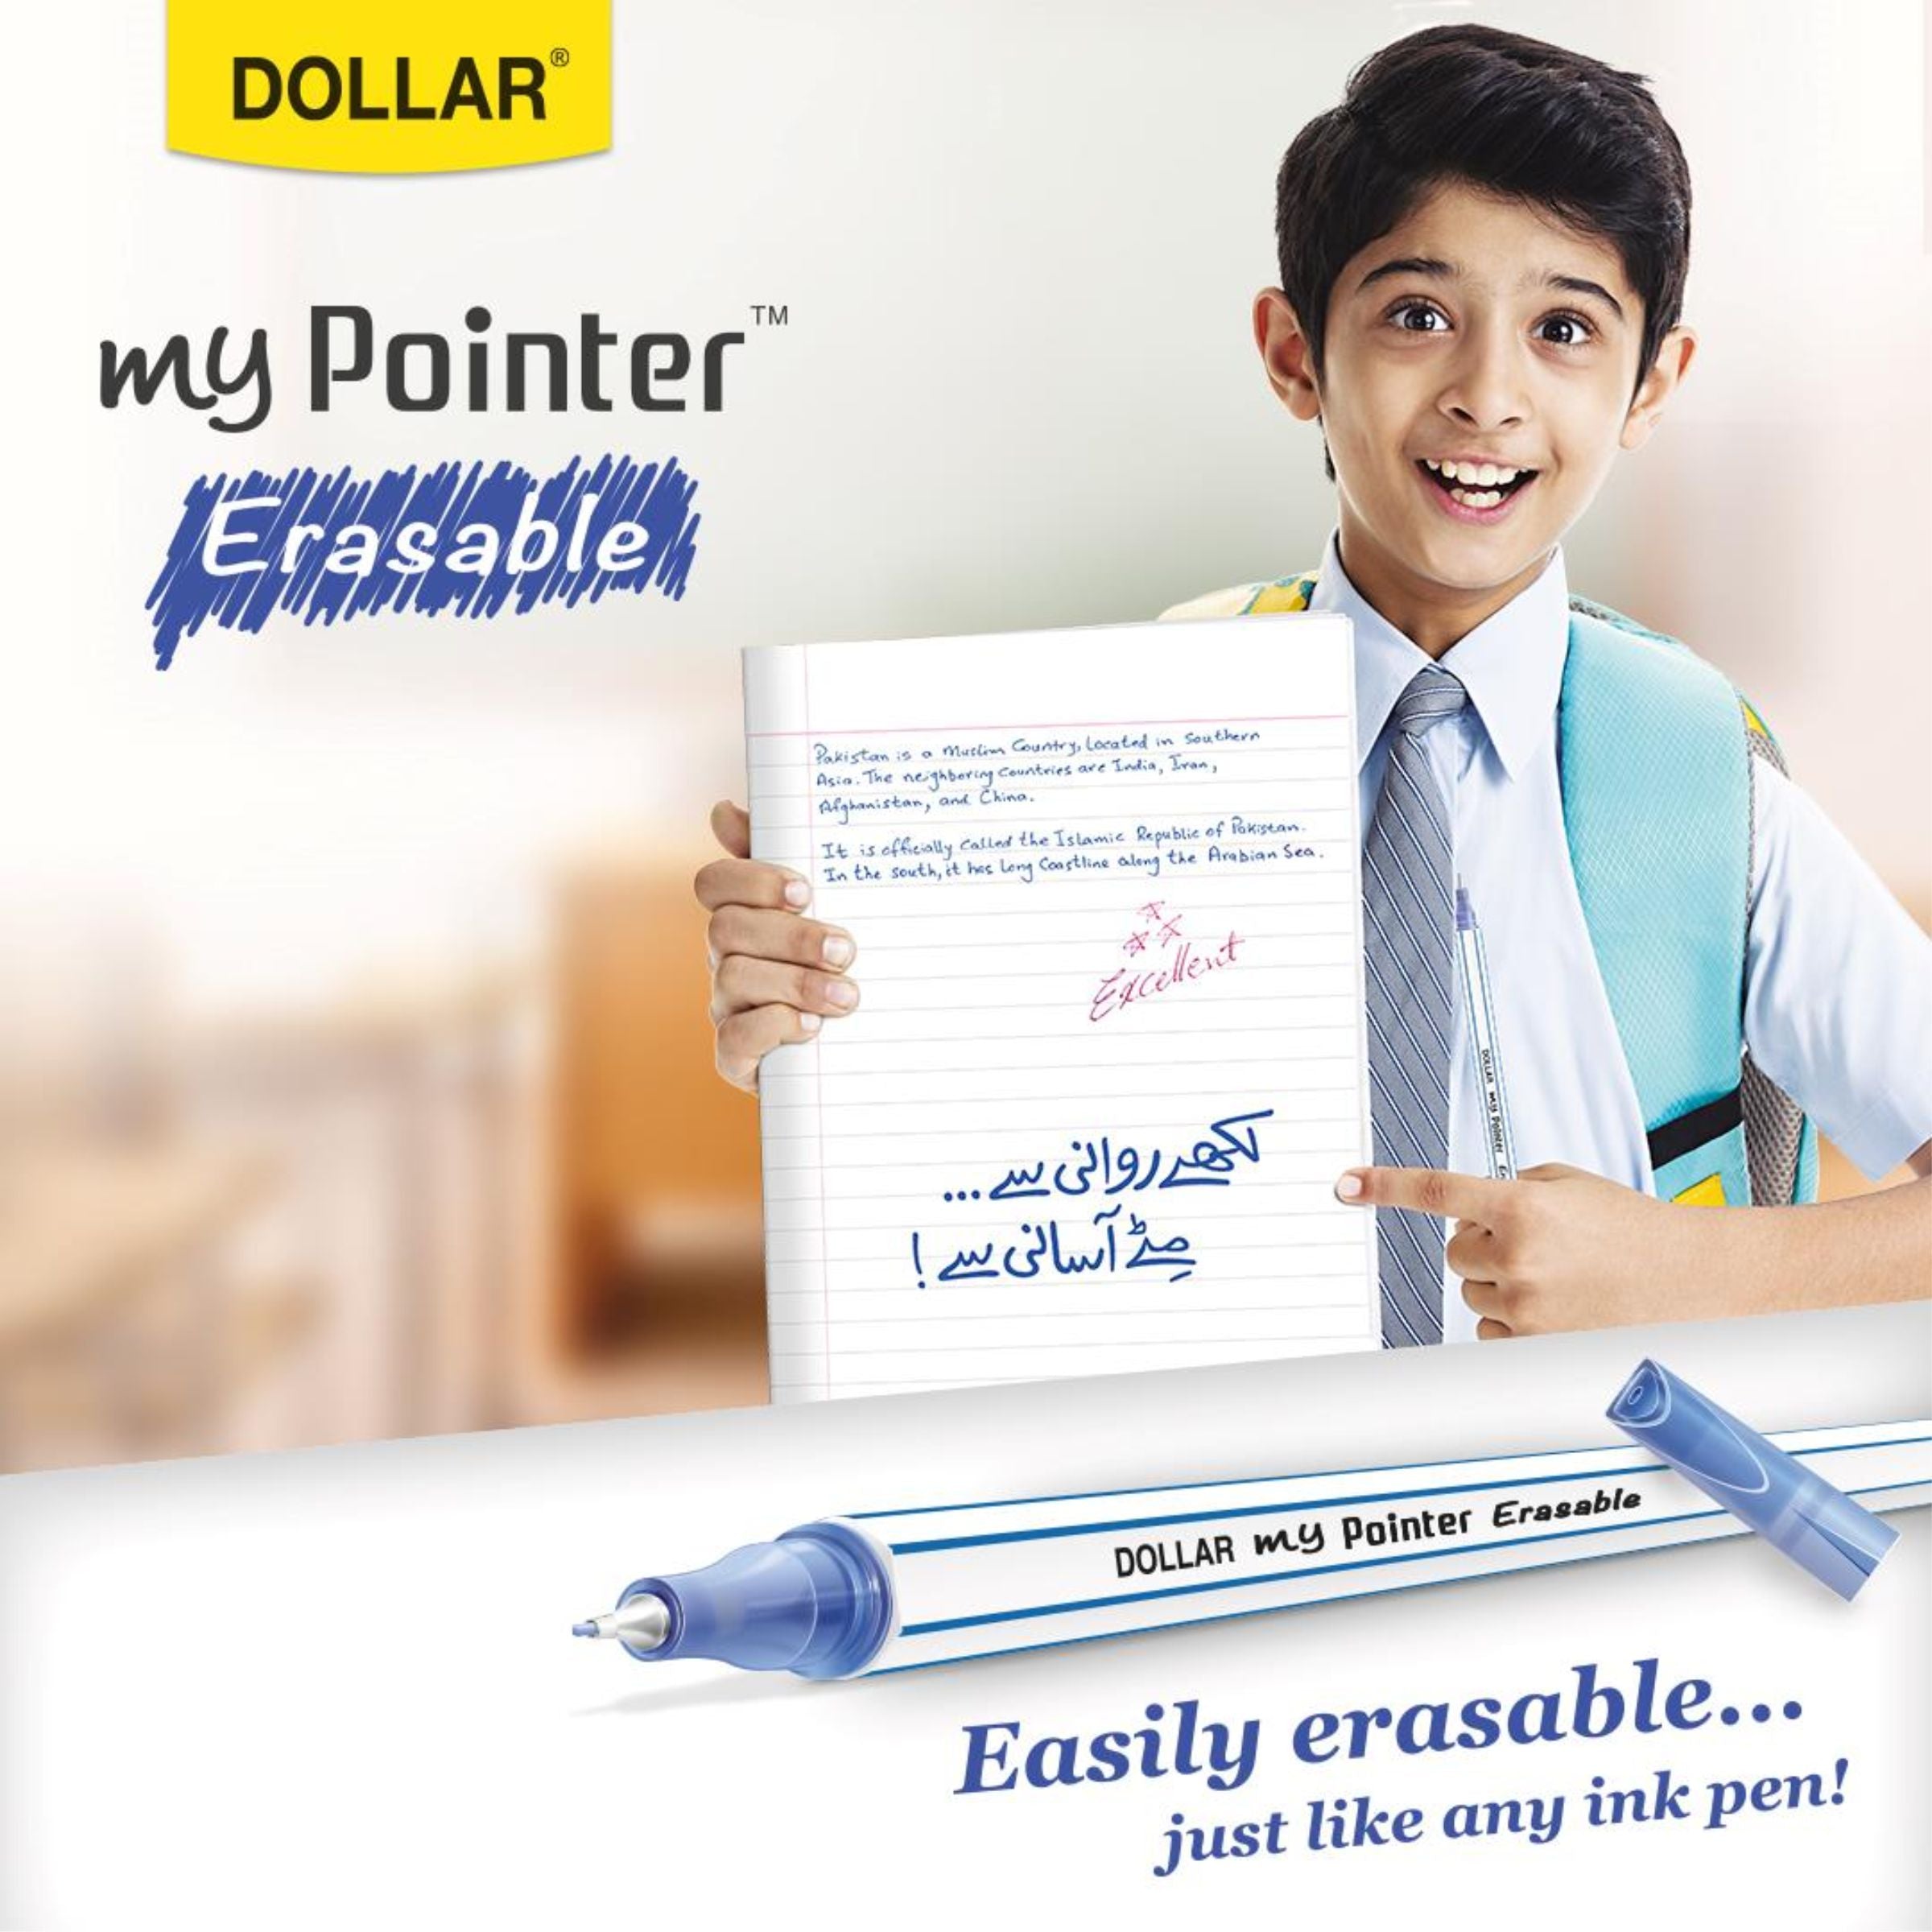 Dollar My Pointer Erasable Pack of 10